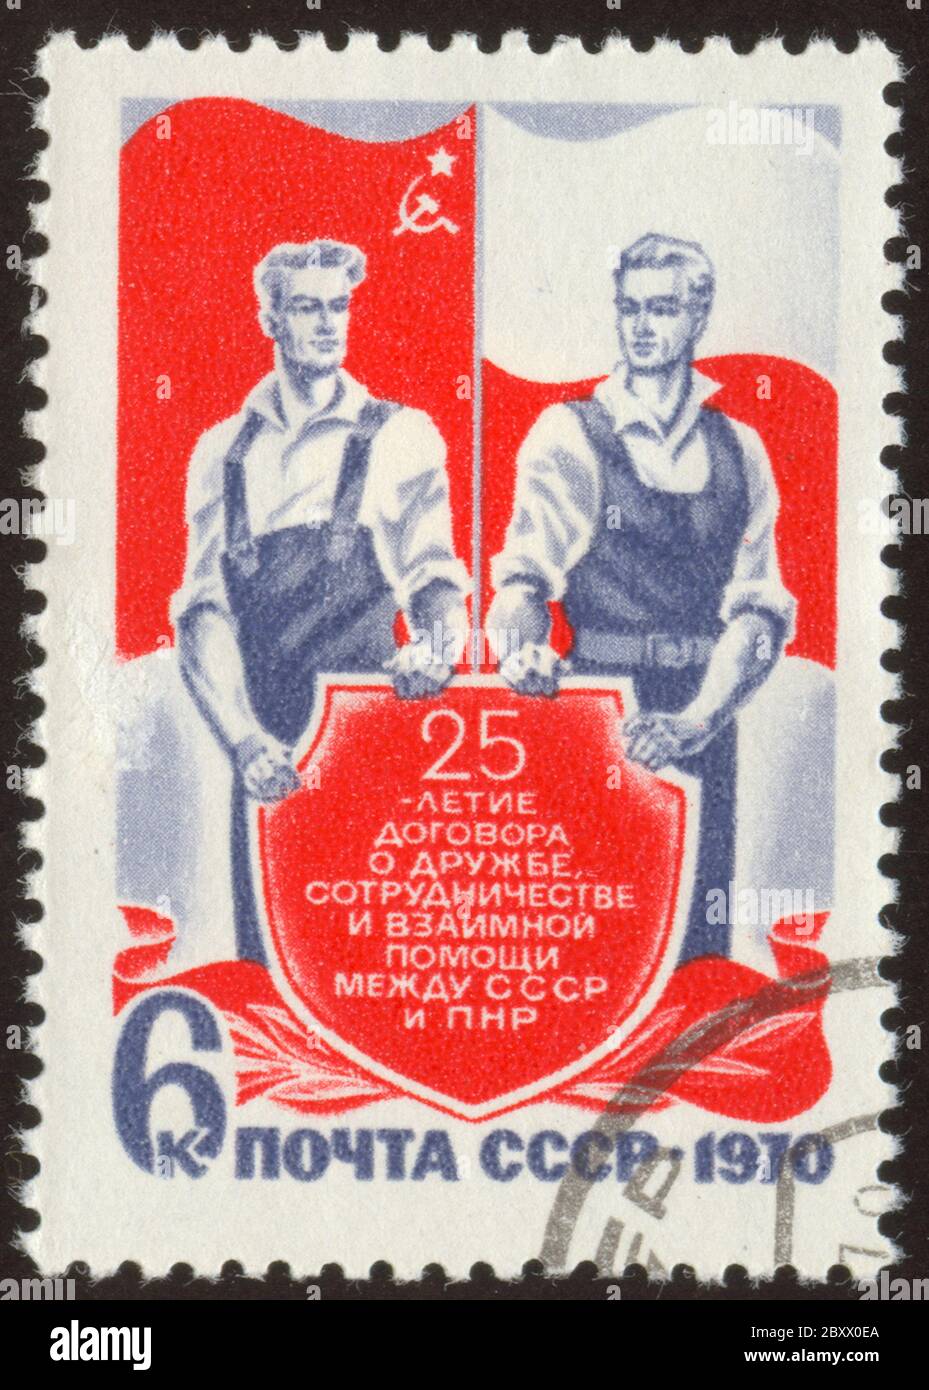 The scanned stamp. Soviet stamp. Two workers against flags. Stock Photo